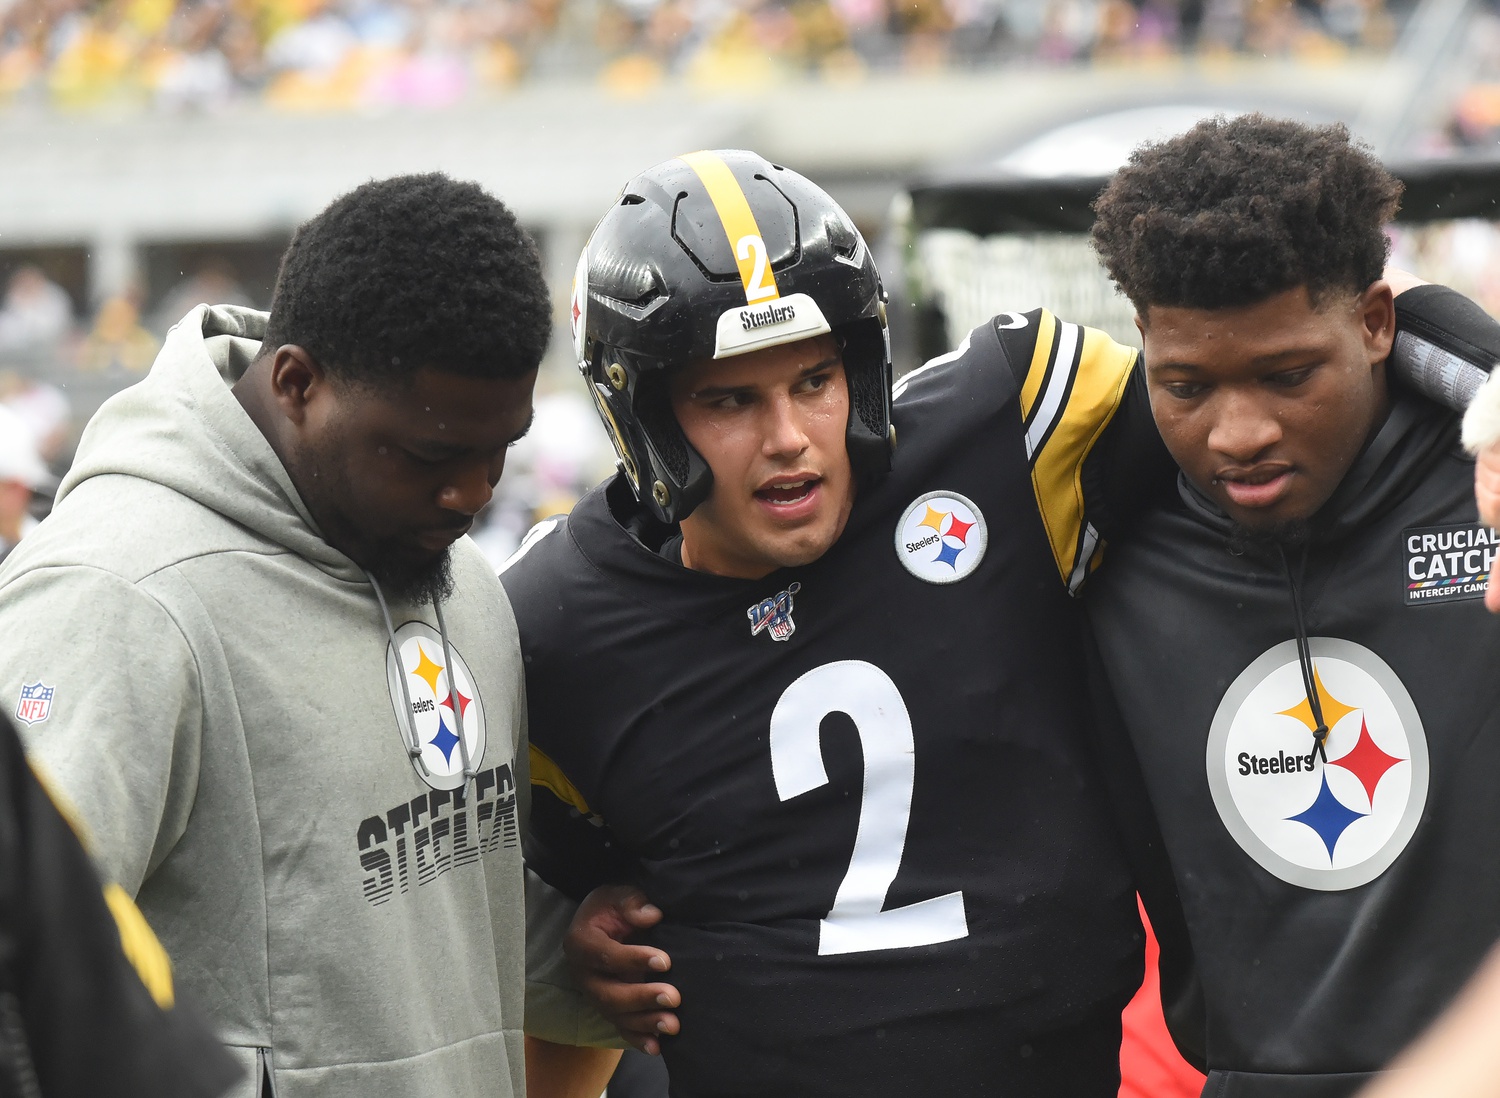 Mason Rudolph reportedly could still play in Week 6 for Steelers vs